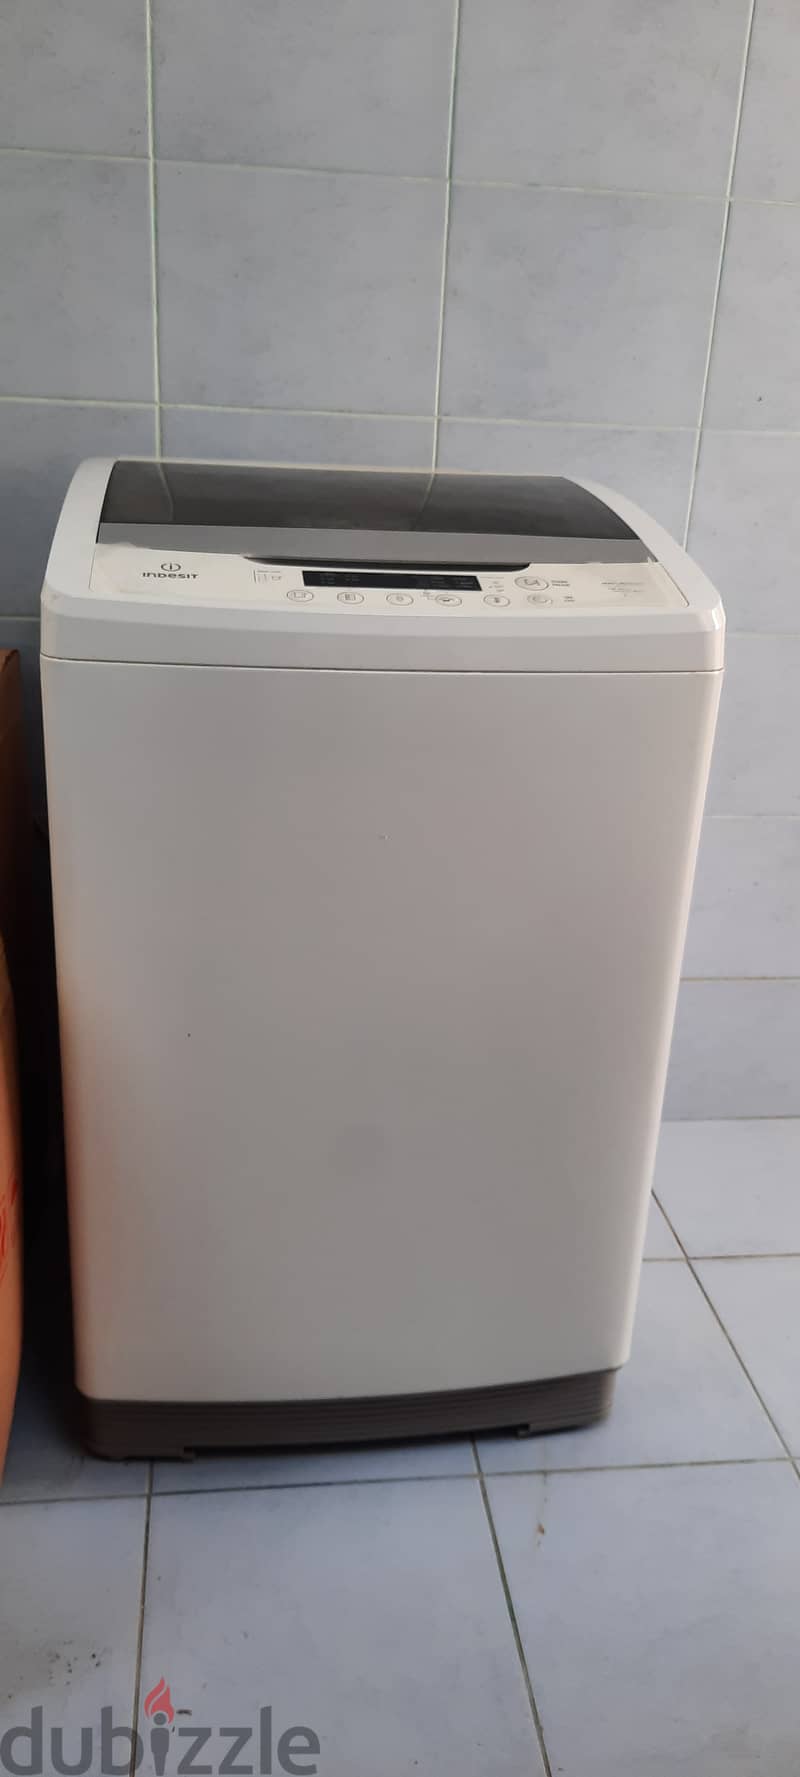 Excellent condition fully automatic washing machine for sale. 3